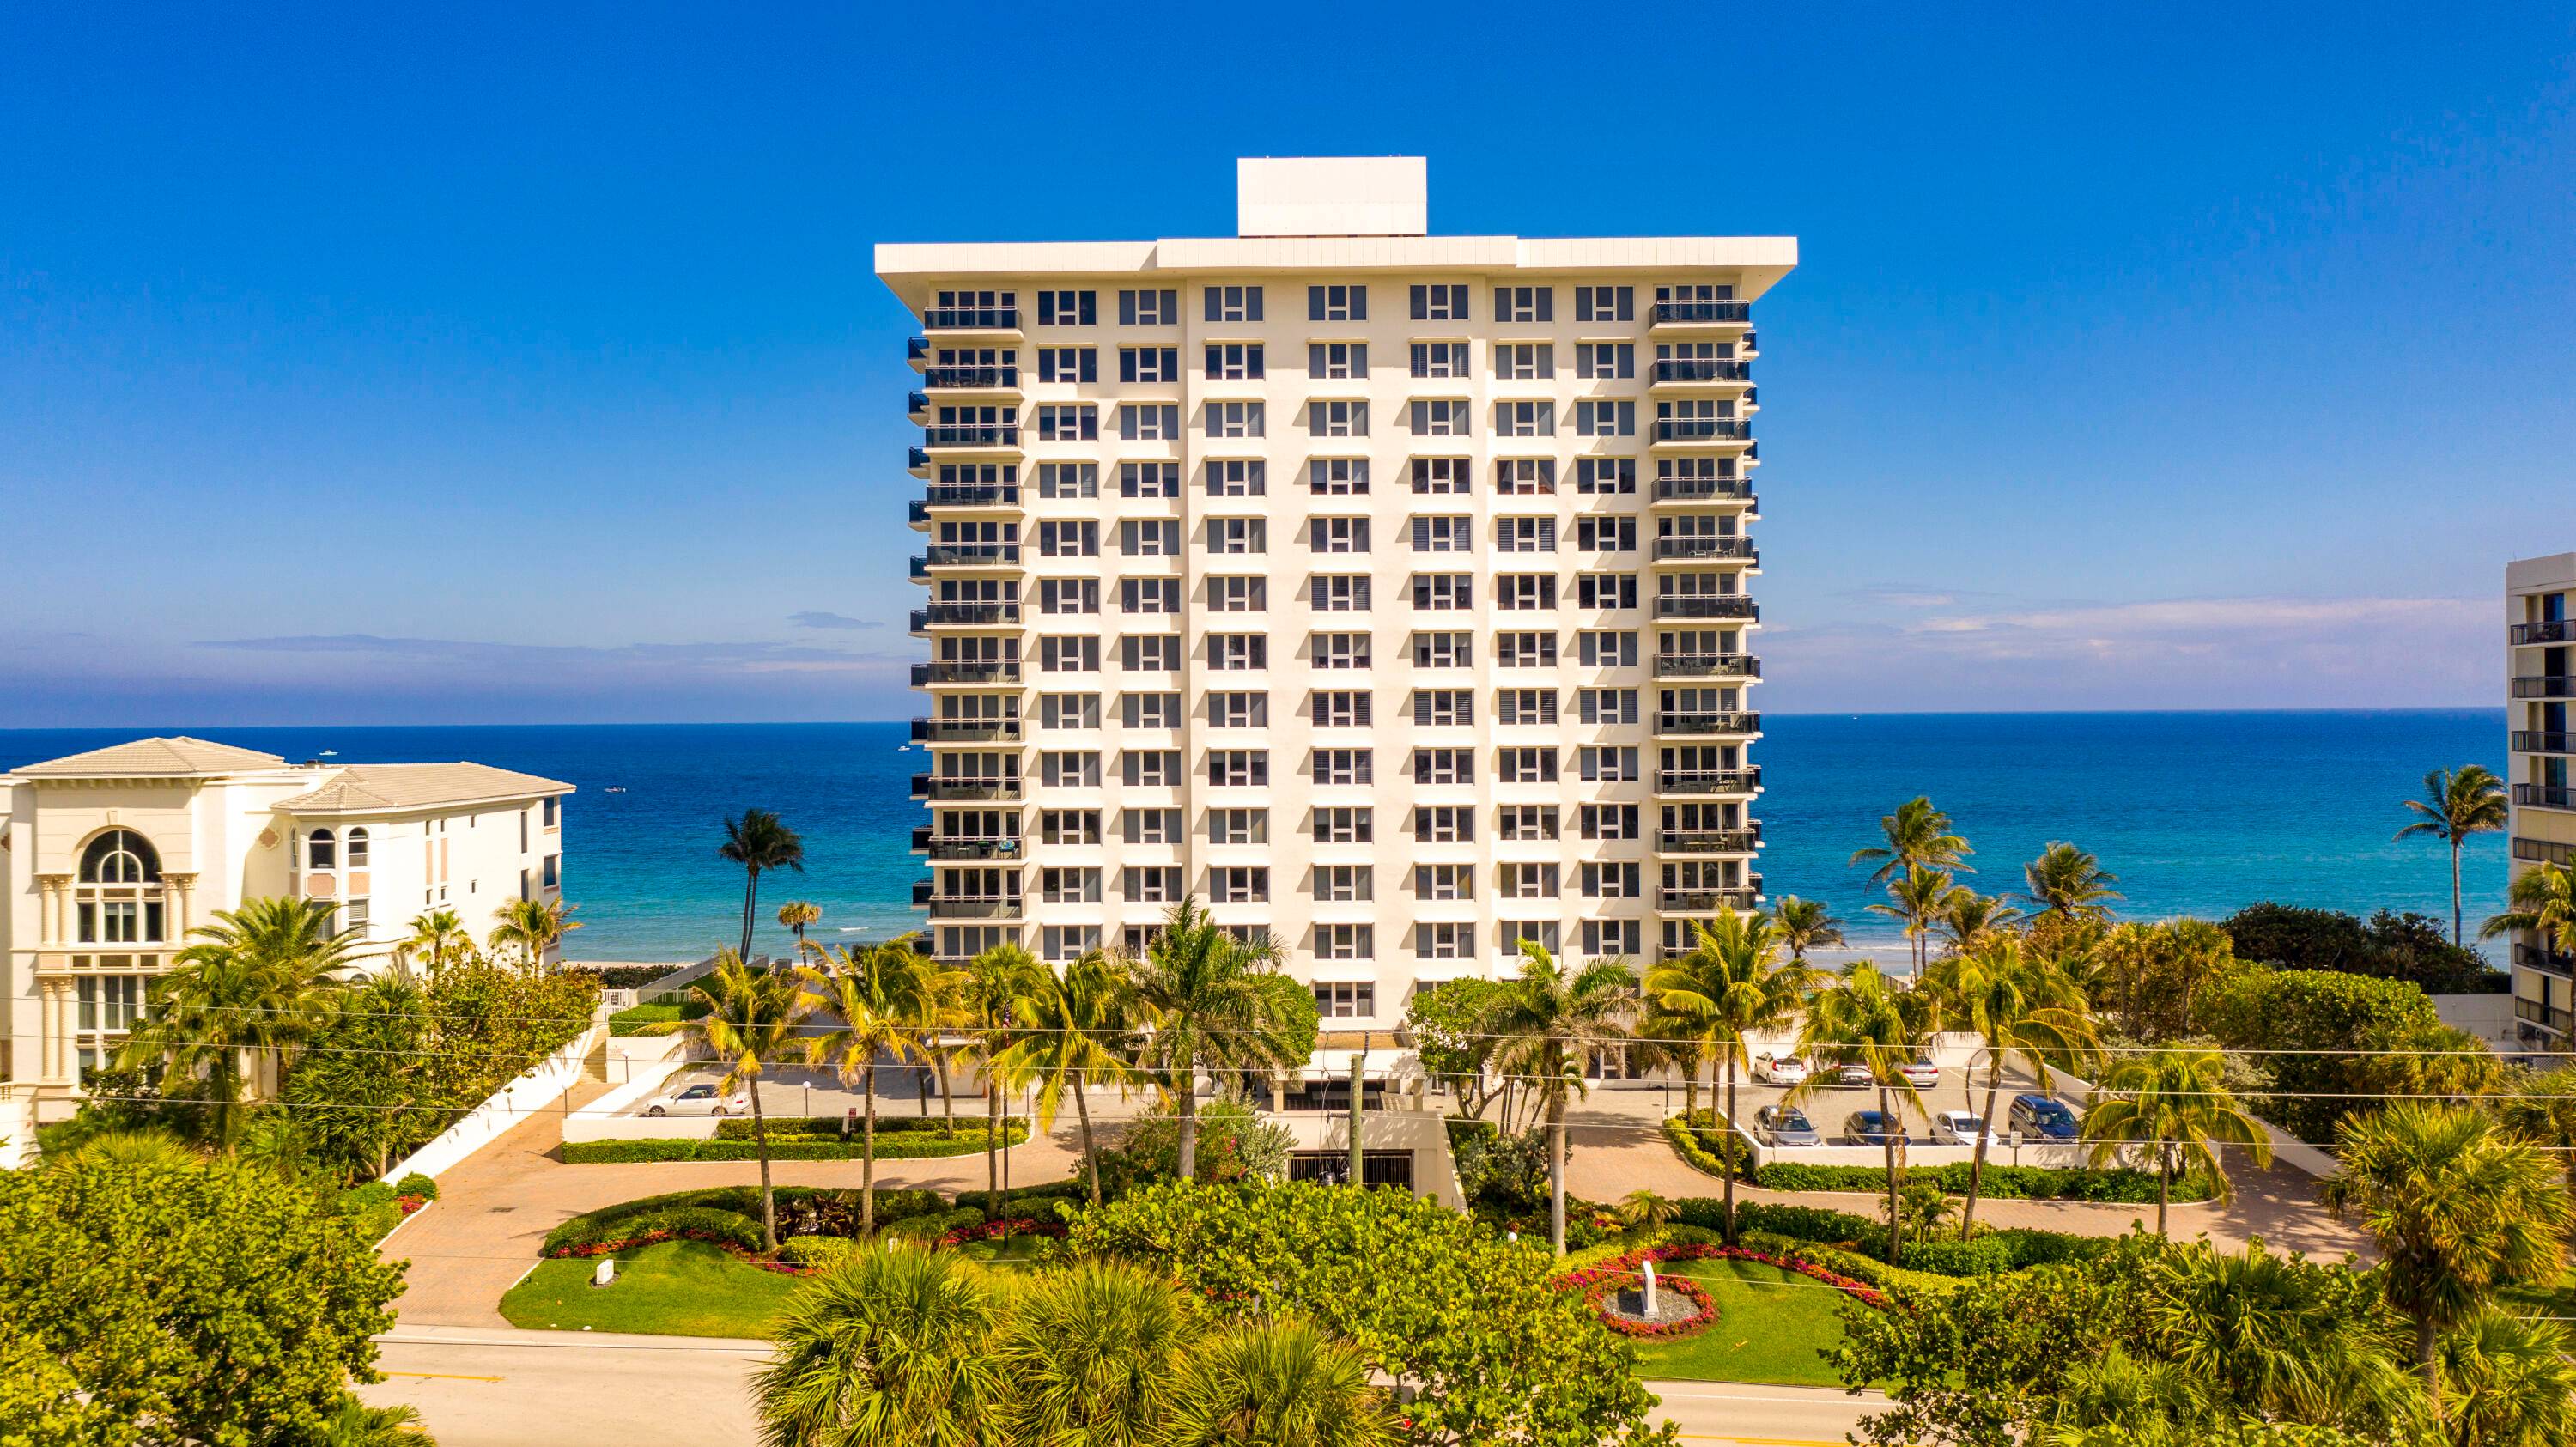 STUNNING OCEAN VIEWS FROM ALL BEDROOMS AND MAIN ROOMS IN THIS COVETED DIRECT OCEANFRONT CORNER CONDOMINIUM IN BOUTIQUE OCEAN REEF TOWERS WITH NEARLY 2000 TOTAL SQUARE FEET !